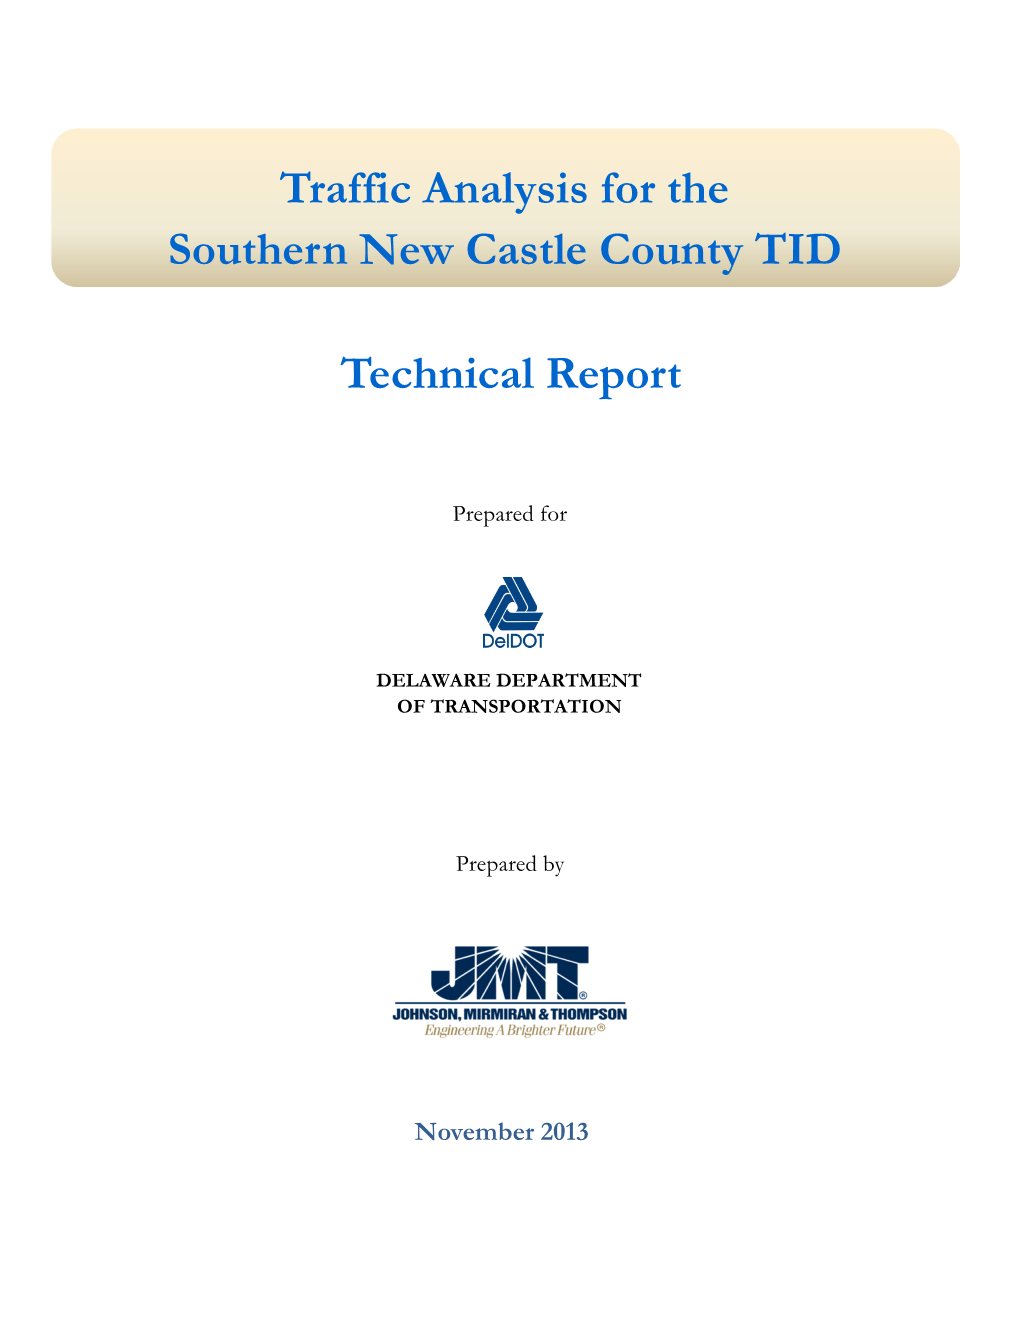 Traffic Analysis for the SNCC